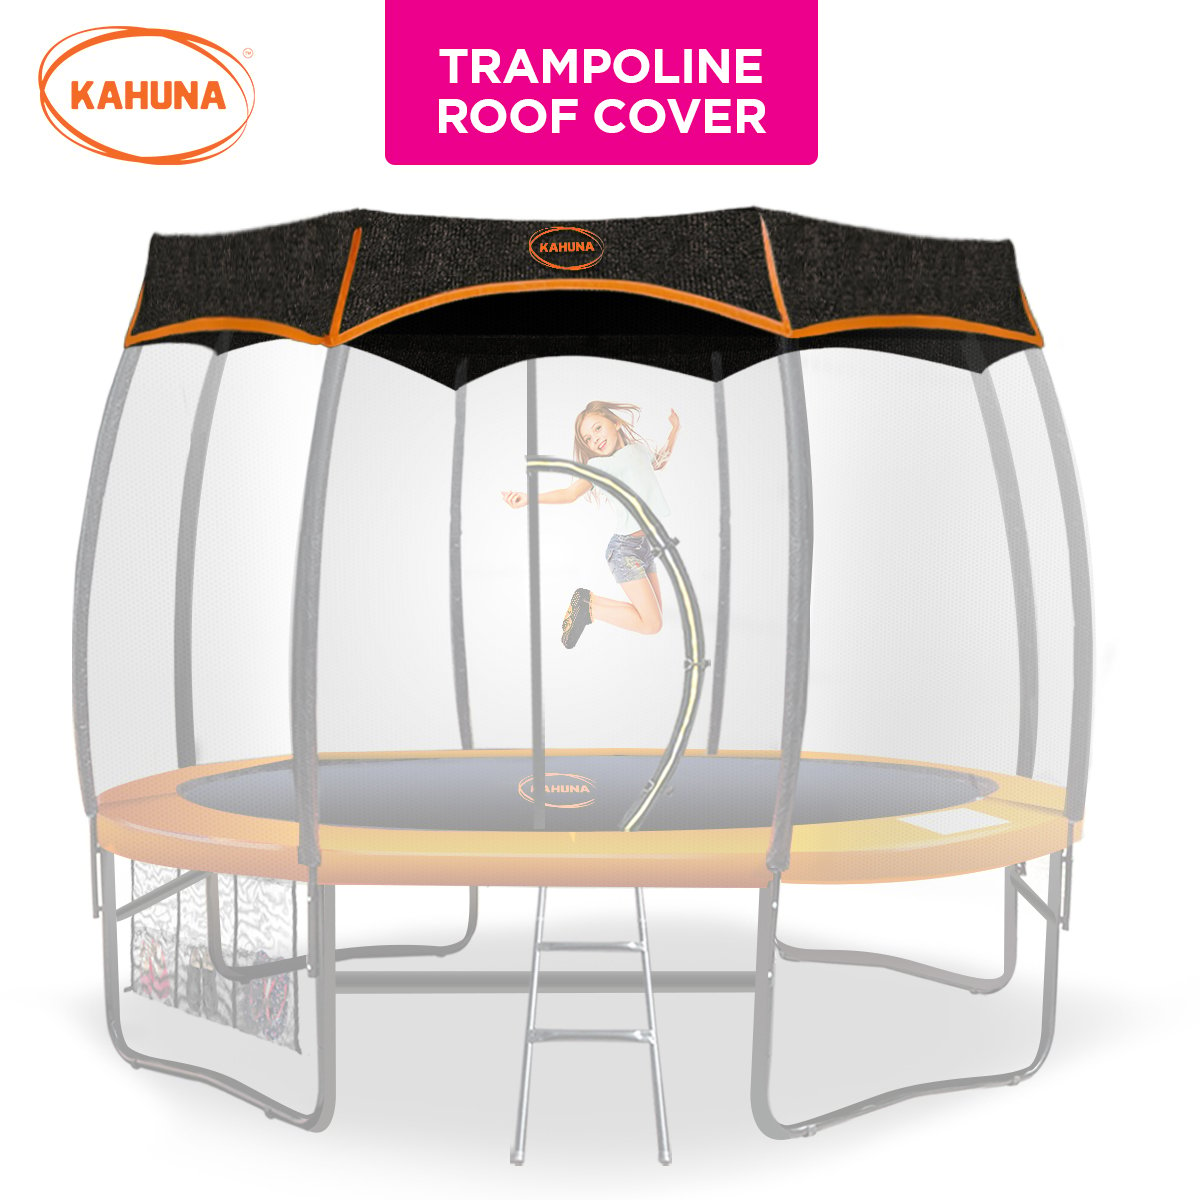 Kahuna 10ft Removable Twister Trampoline Roof Shade Cover